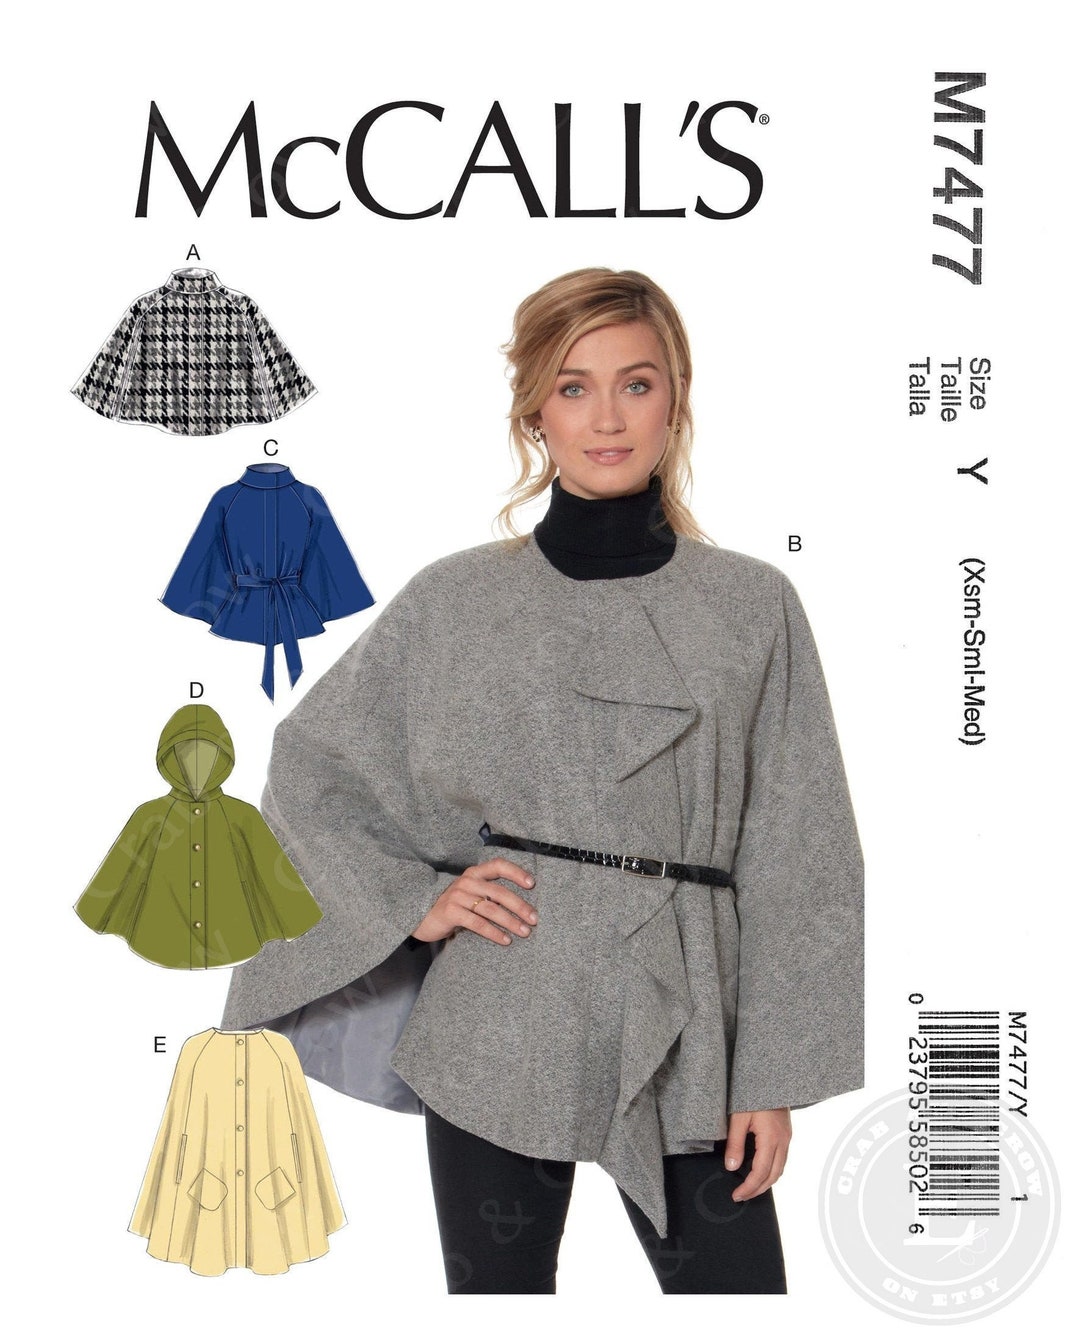 Mccalls M7477 Sewing Pattern for Misses Lined Capes and Belt - Etsy